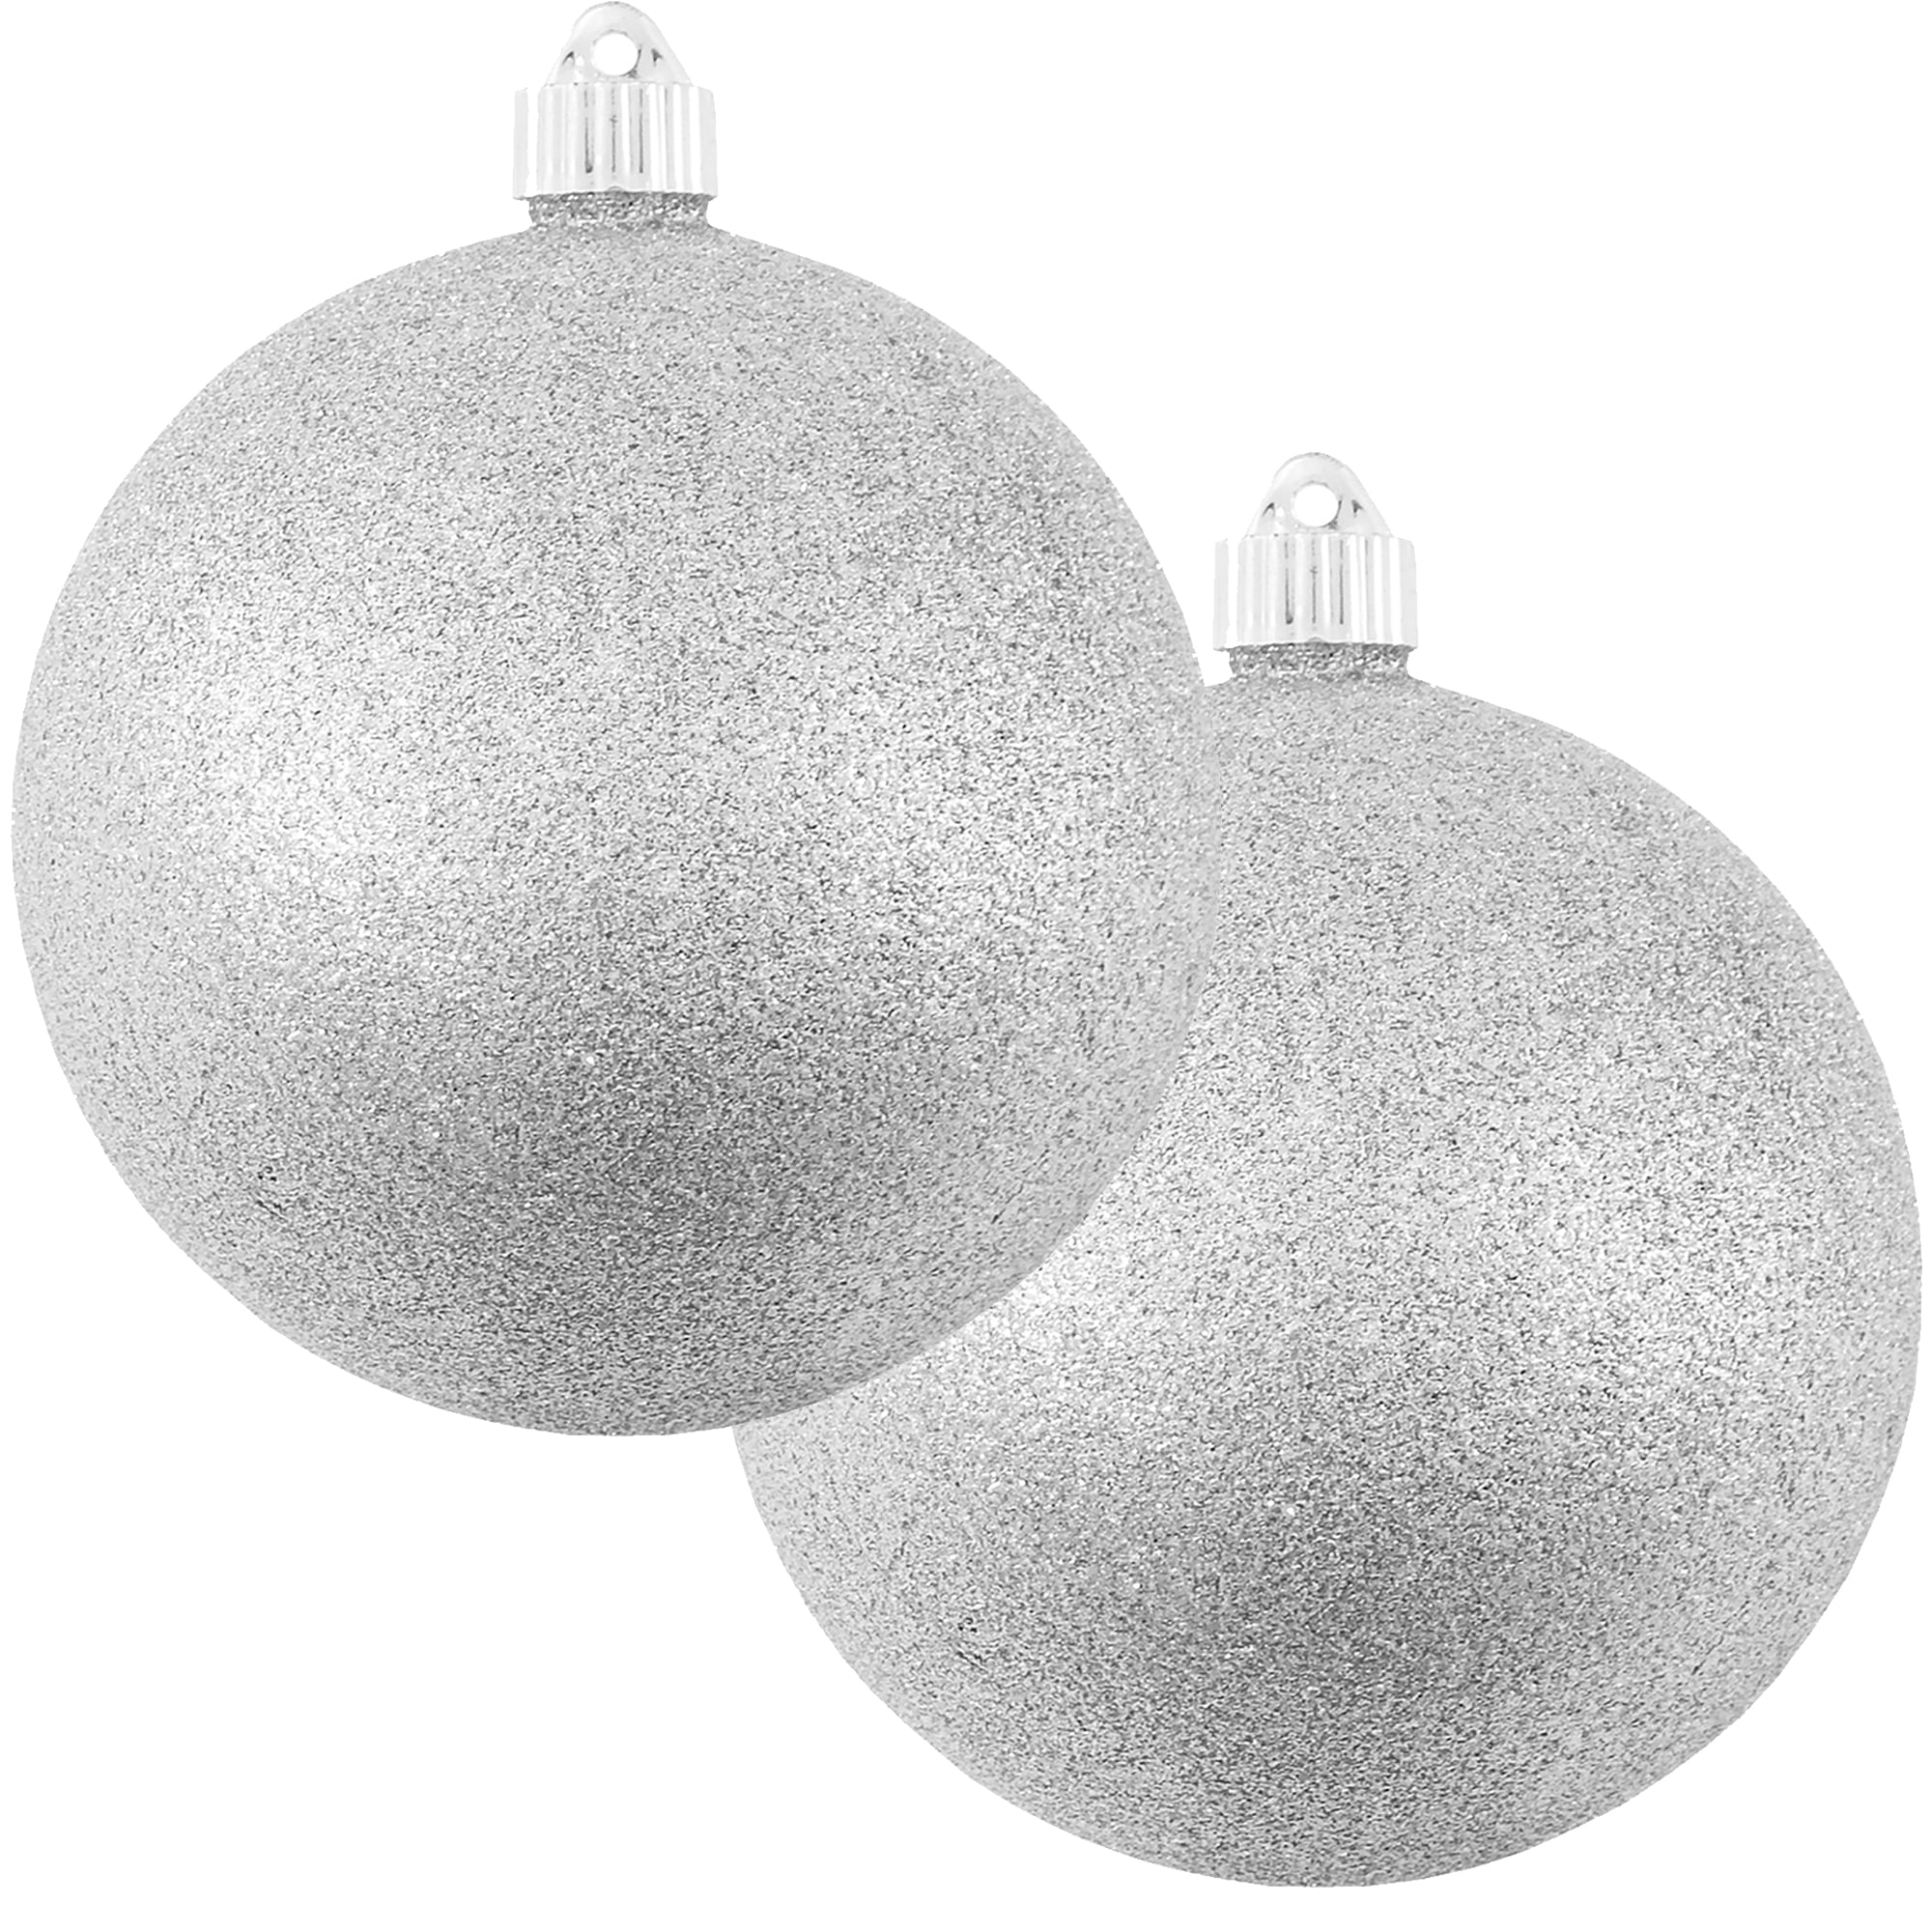 8 Silver 2.5 IN Ball Shatter Resistant Christmas Ornament Decoration Frozen 